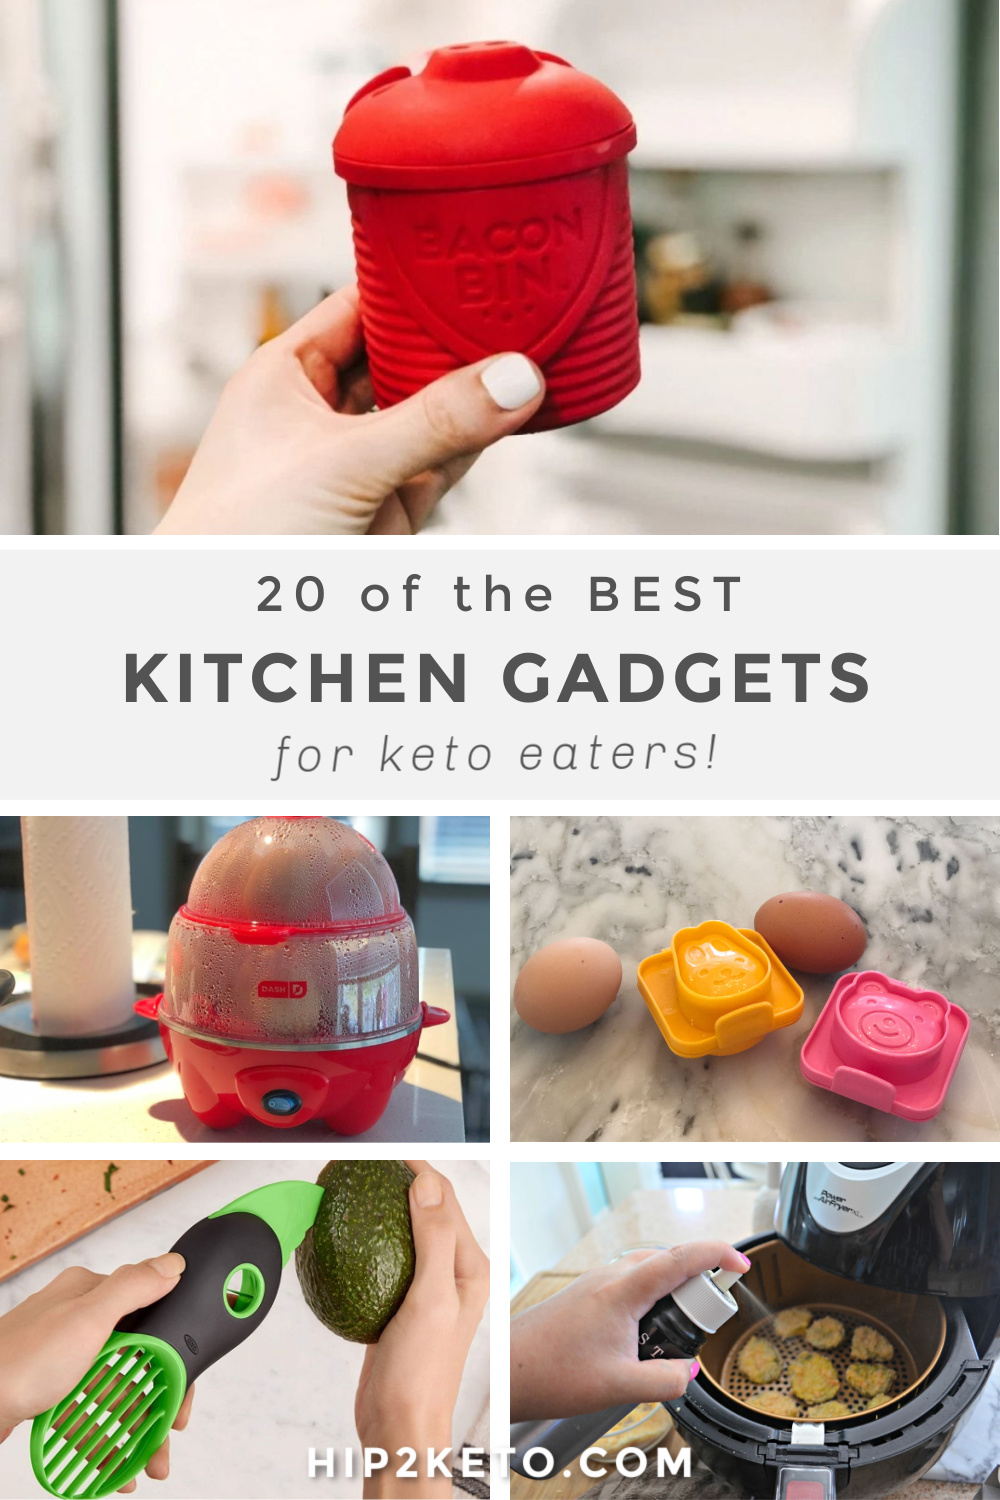 The Best Kitchen Gadgets of 2018